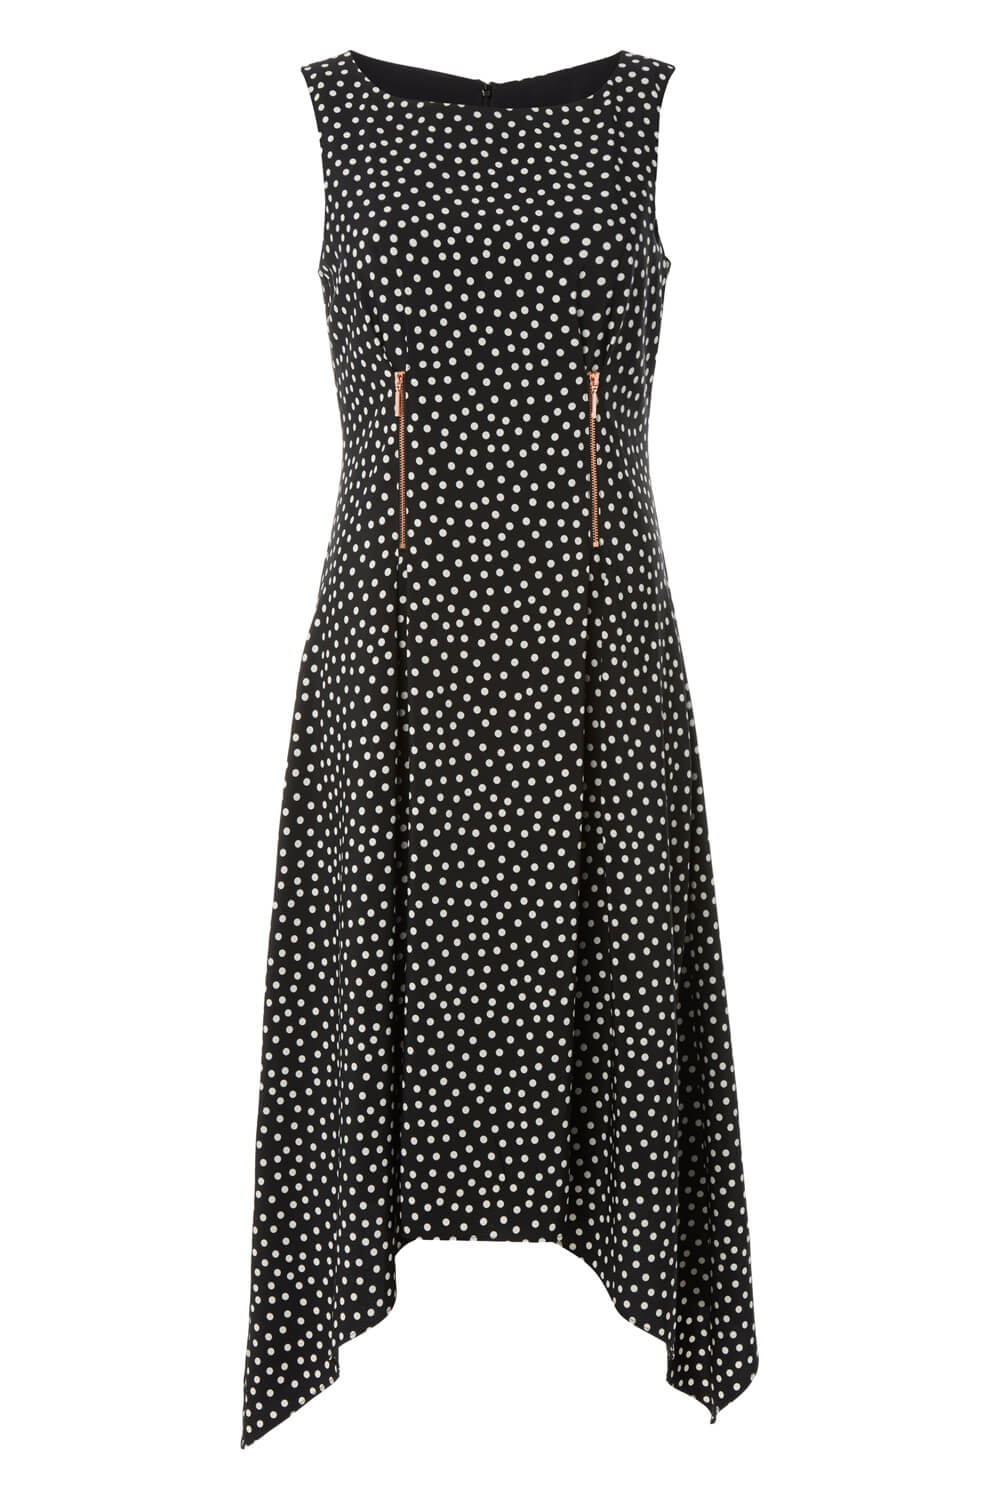 Black Zip Detail Fit and Flare Spot Dress, Image 4 of 4